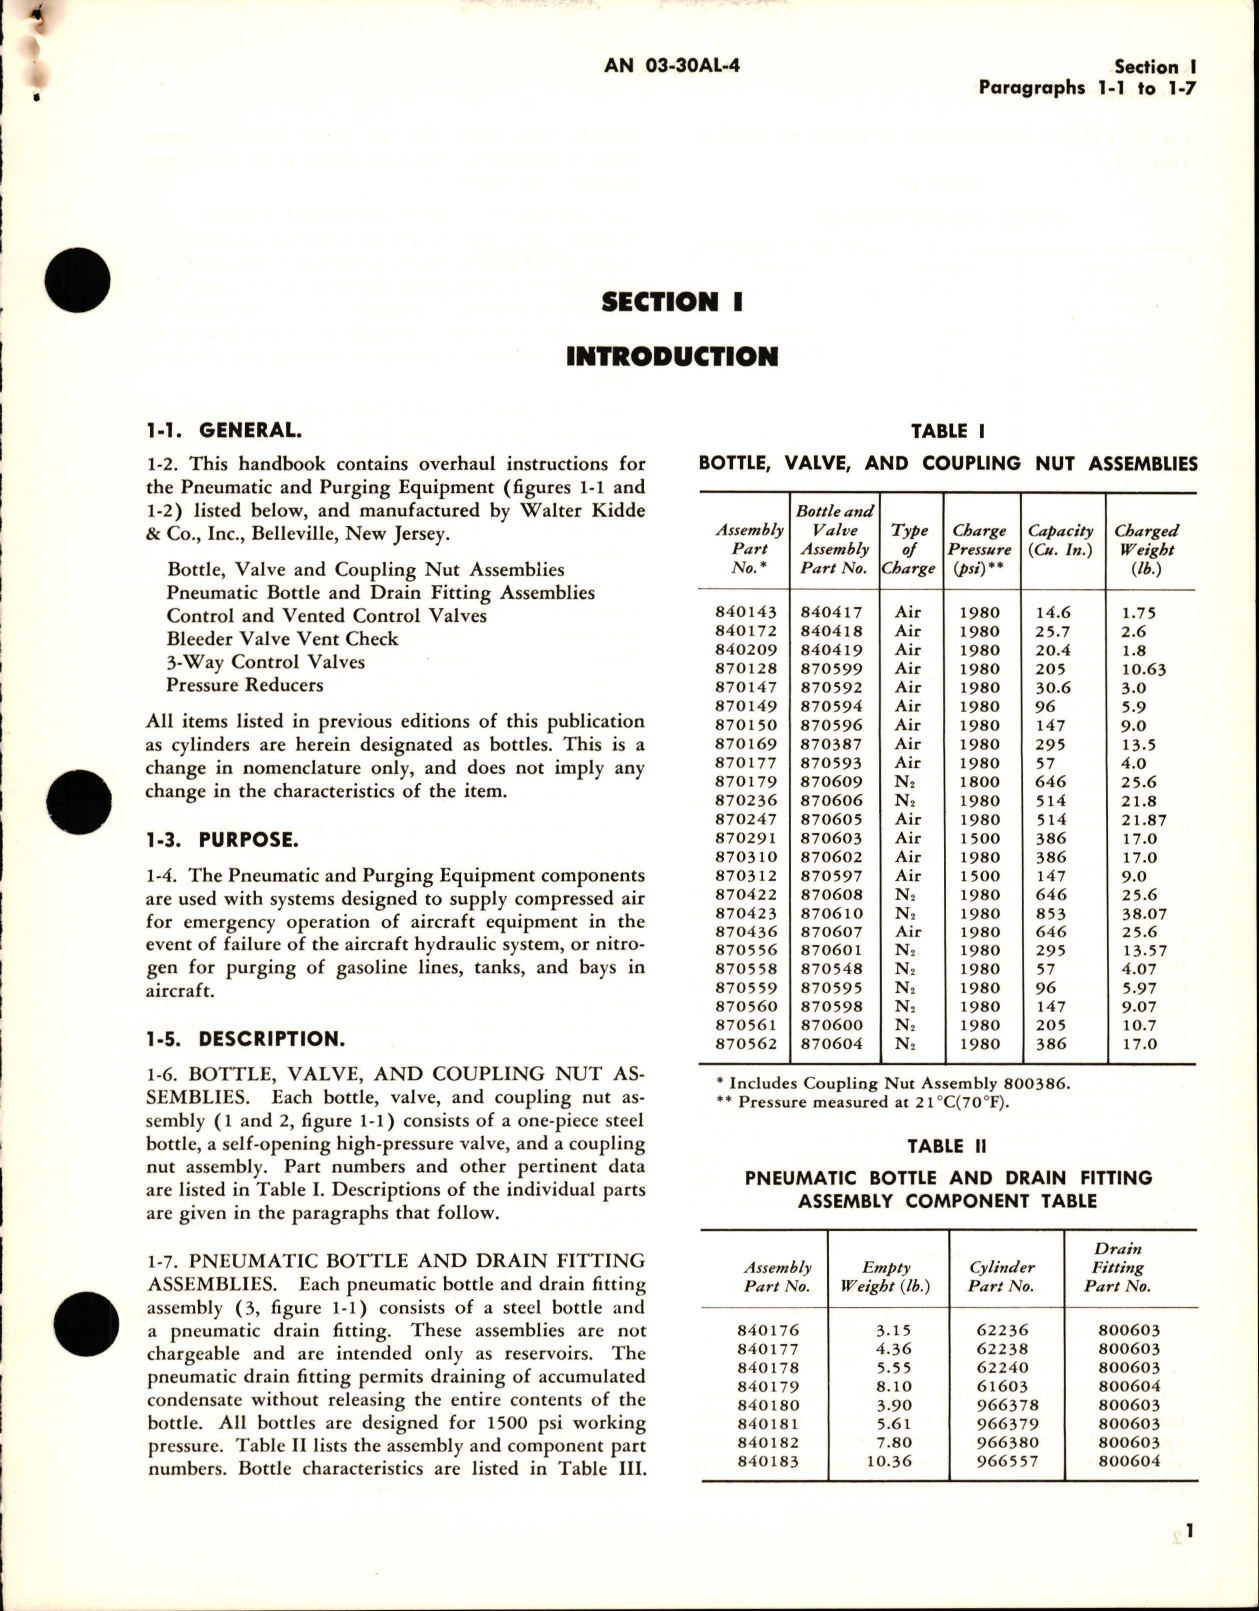 Sample page 7 from AirCorps Library document: Overhaul Instructions for Pneumatic and Purging Equipment